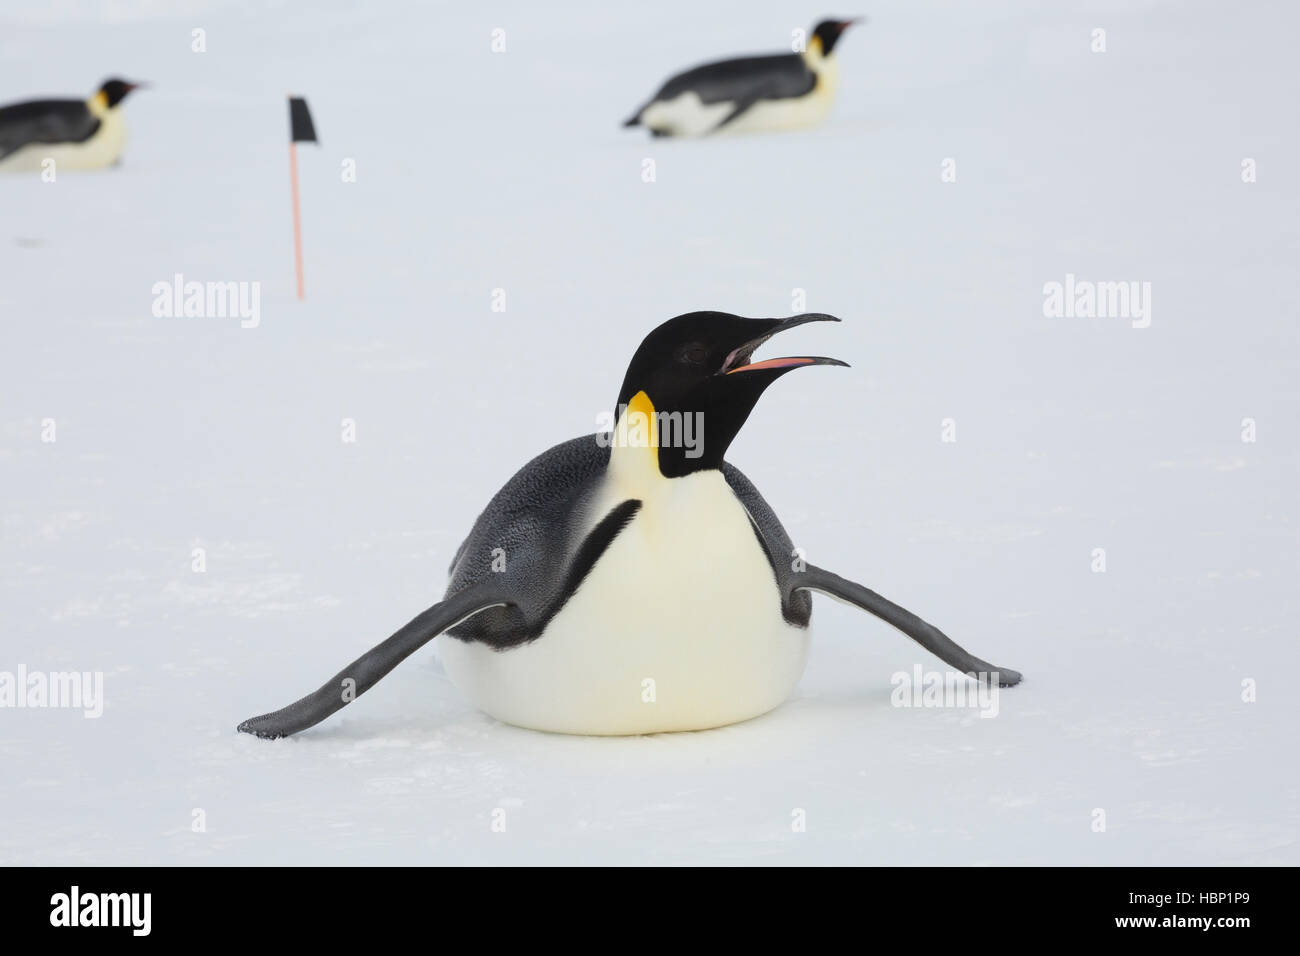 An adult Emperor Penguin with open beak is sledging on the ice of the frozen Weddell Sea Stock Photo